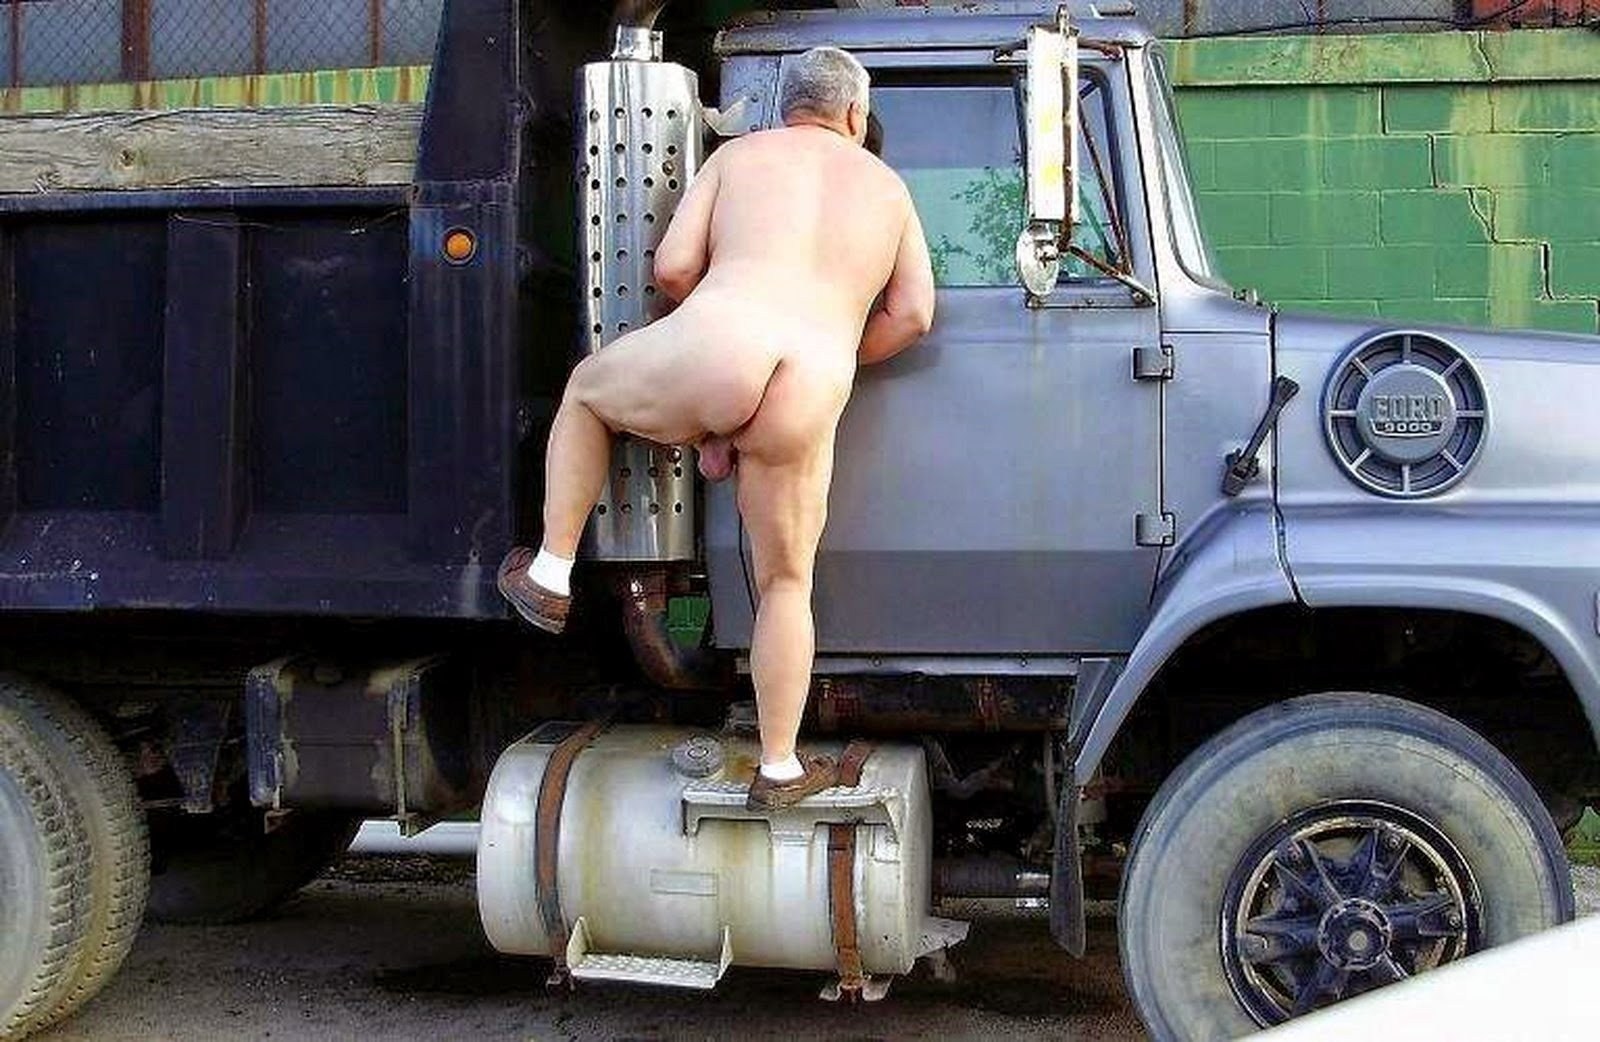 Trucker Fuckked a Woman in the Cab (83 photos)